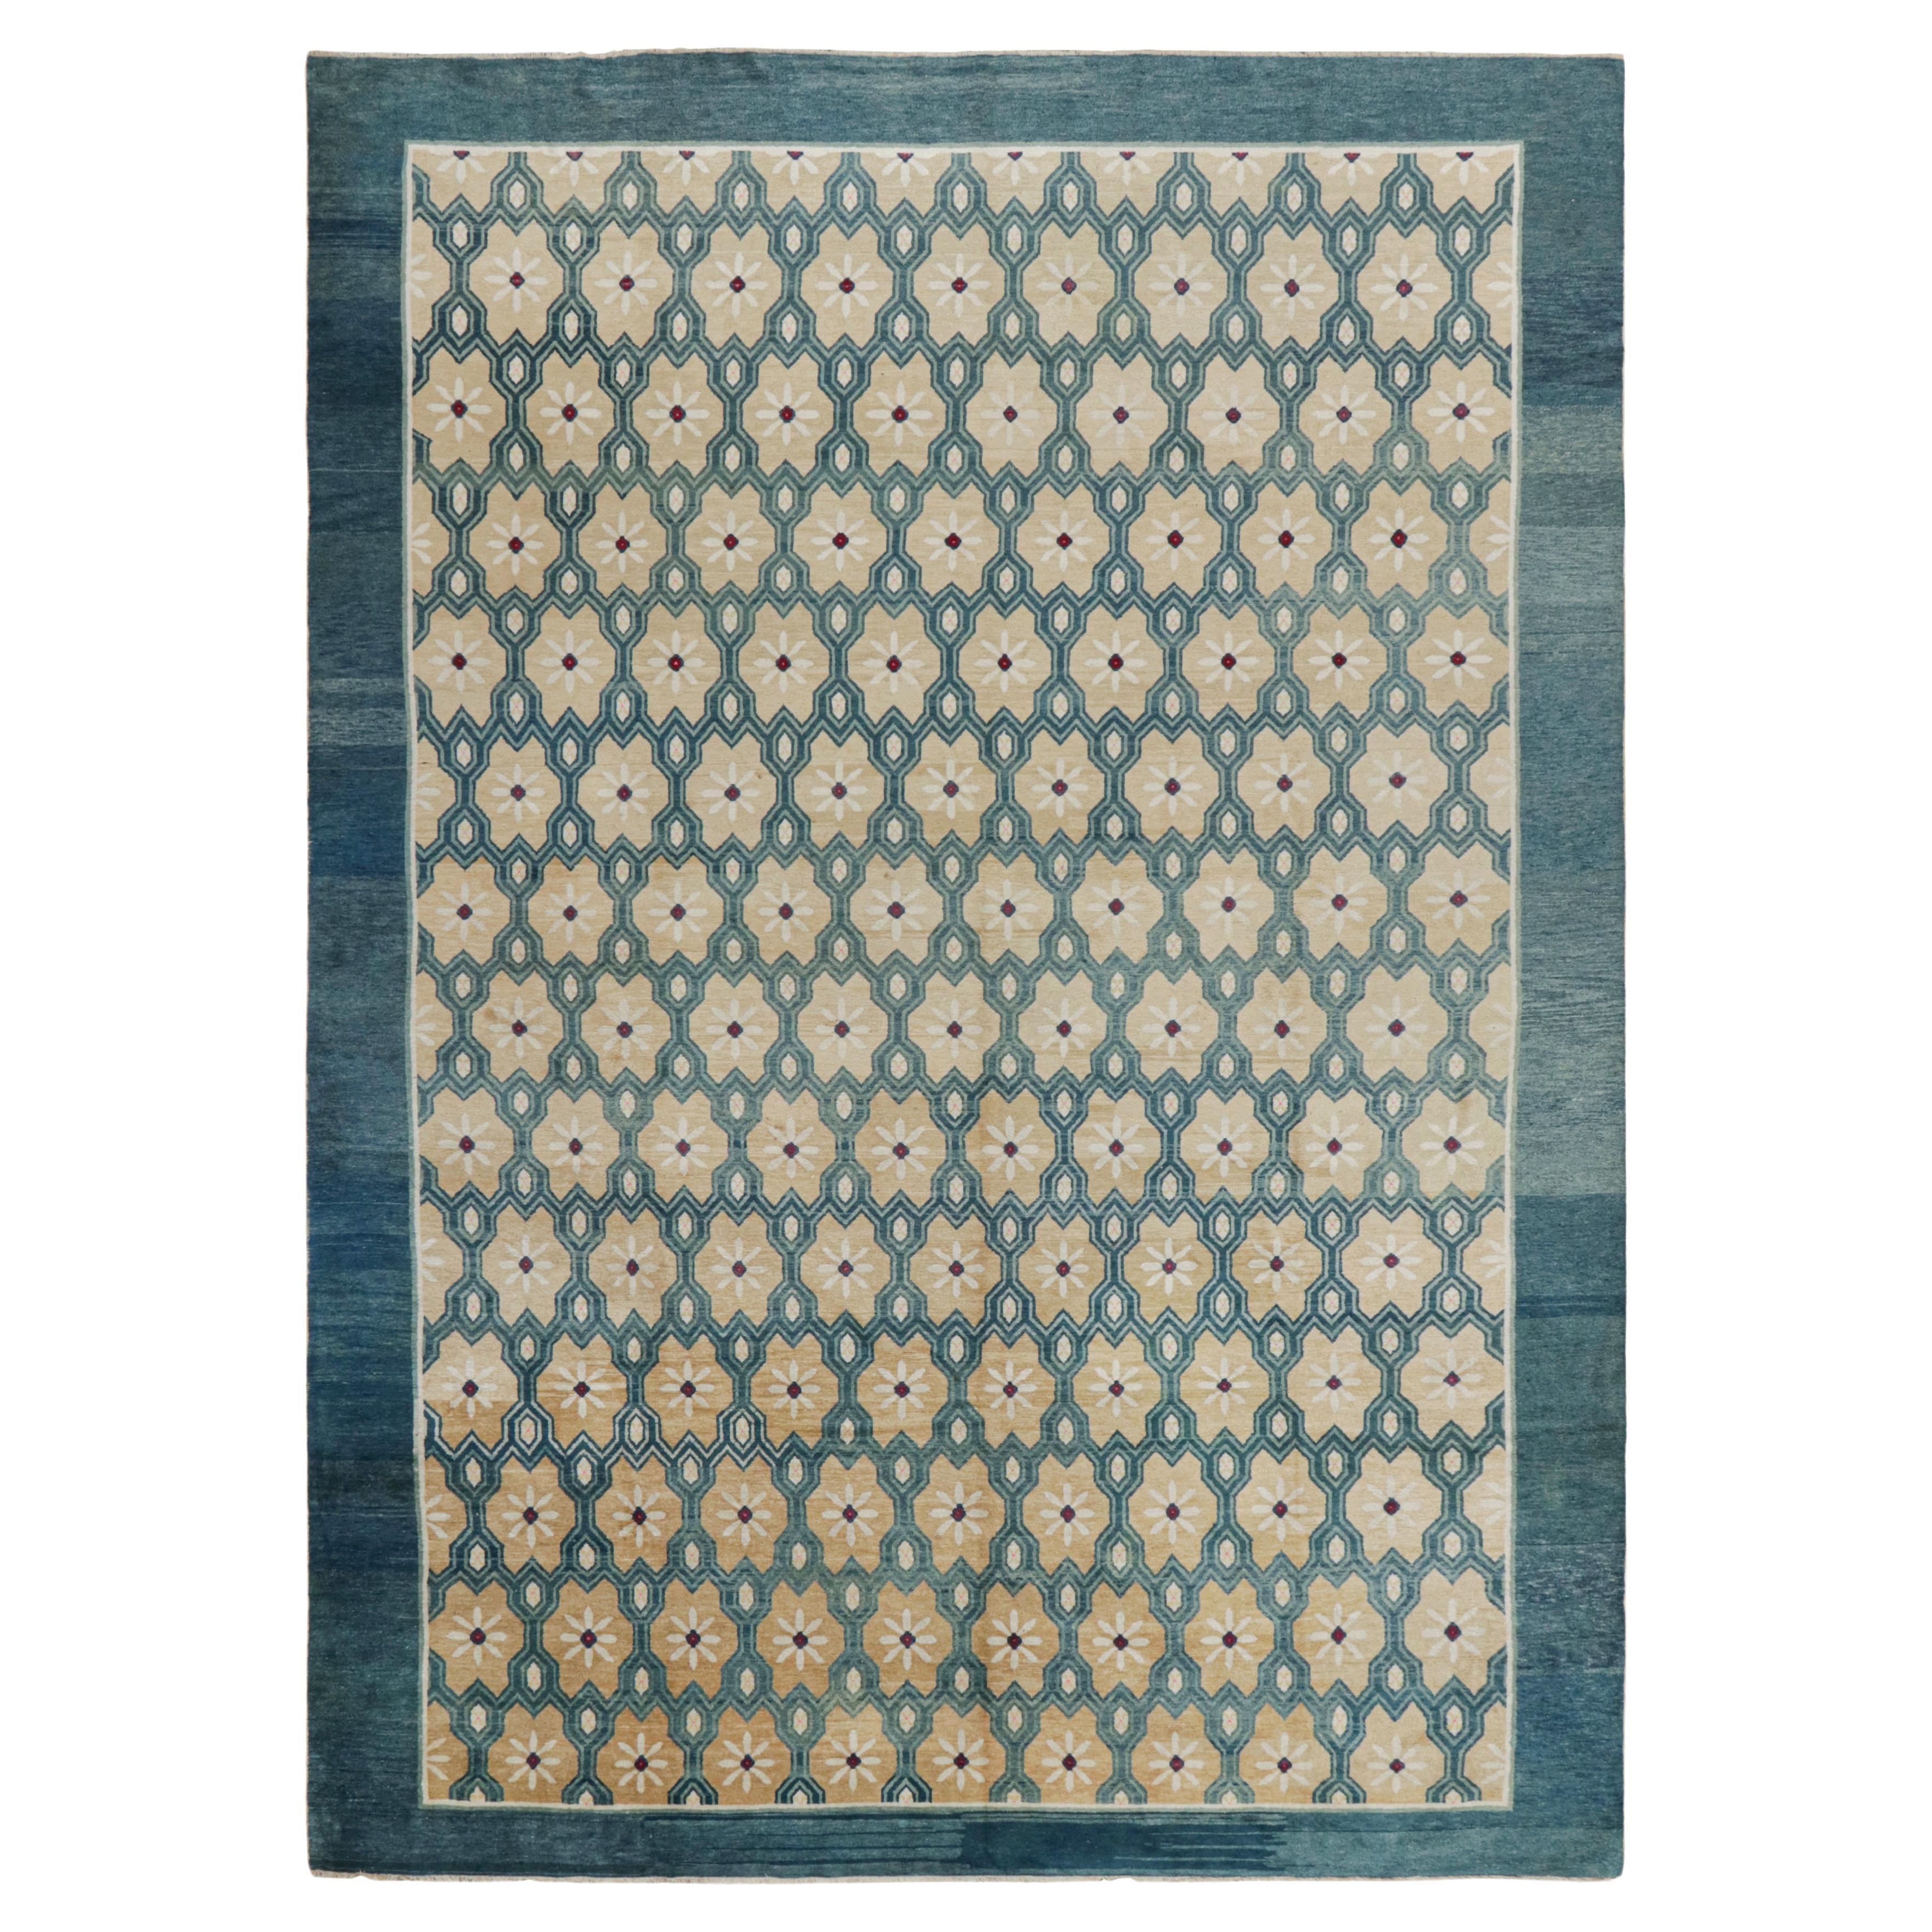 Antique Peking Rug in Blue and Beige with Floral Patterns